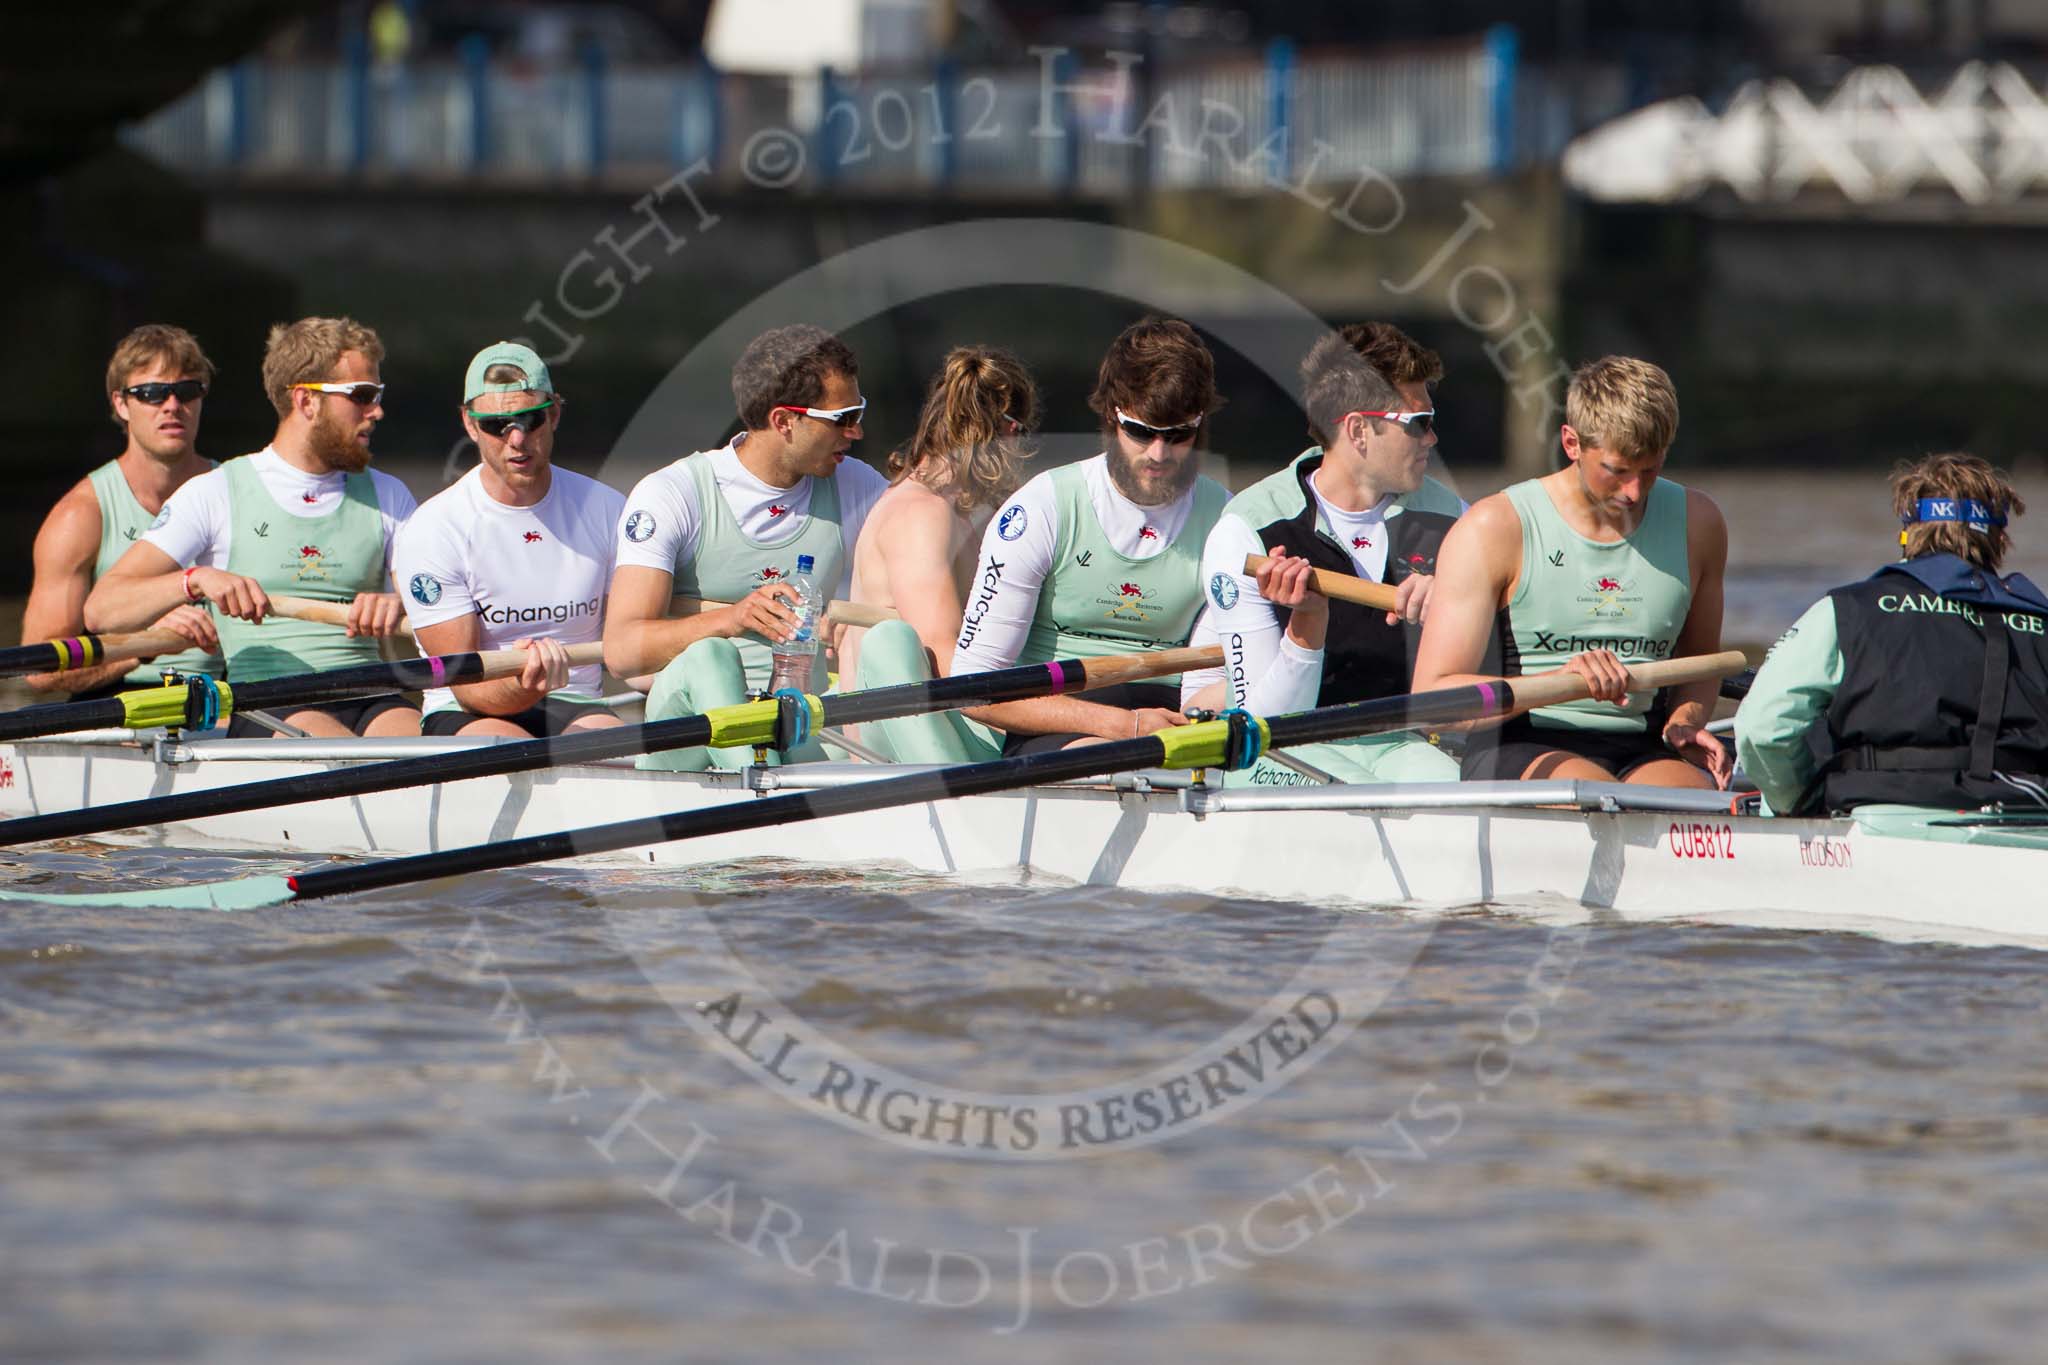 The Boat Race season 2012 - Tideway Week (Tuesday).




on 03 April 2012 at 10:45, image #74